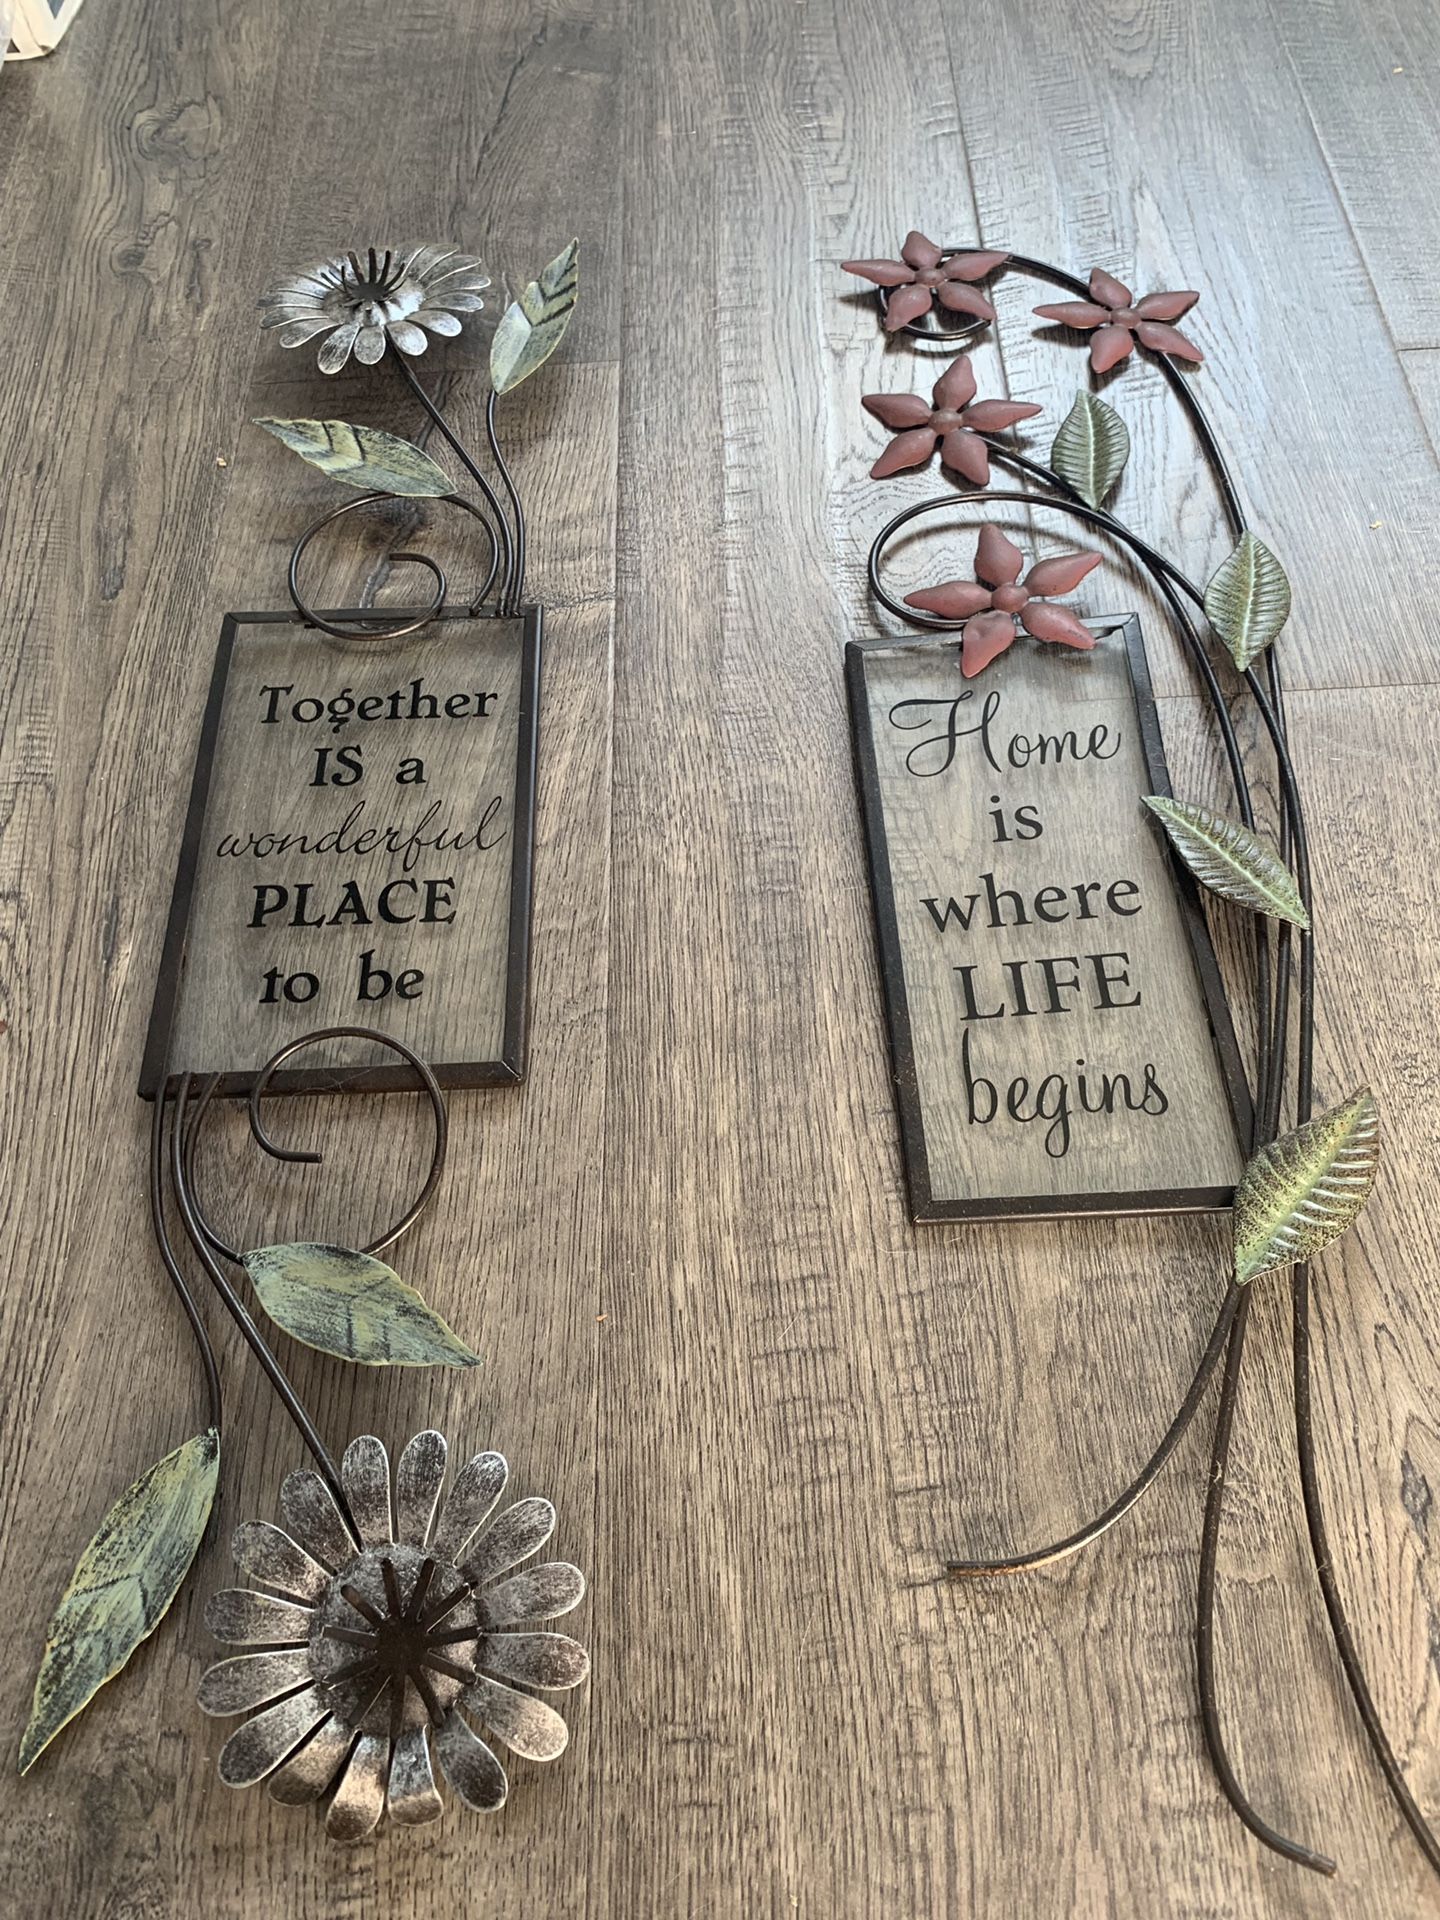 Home decorations